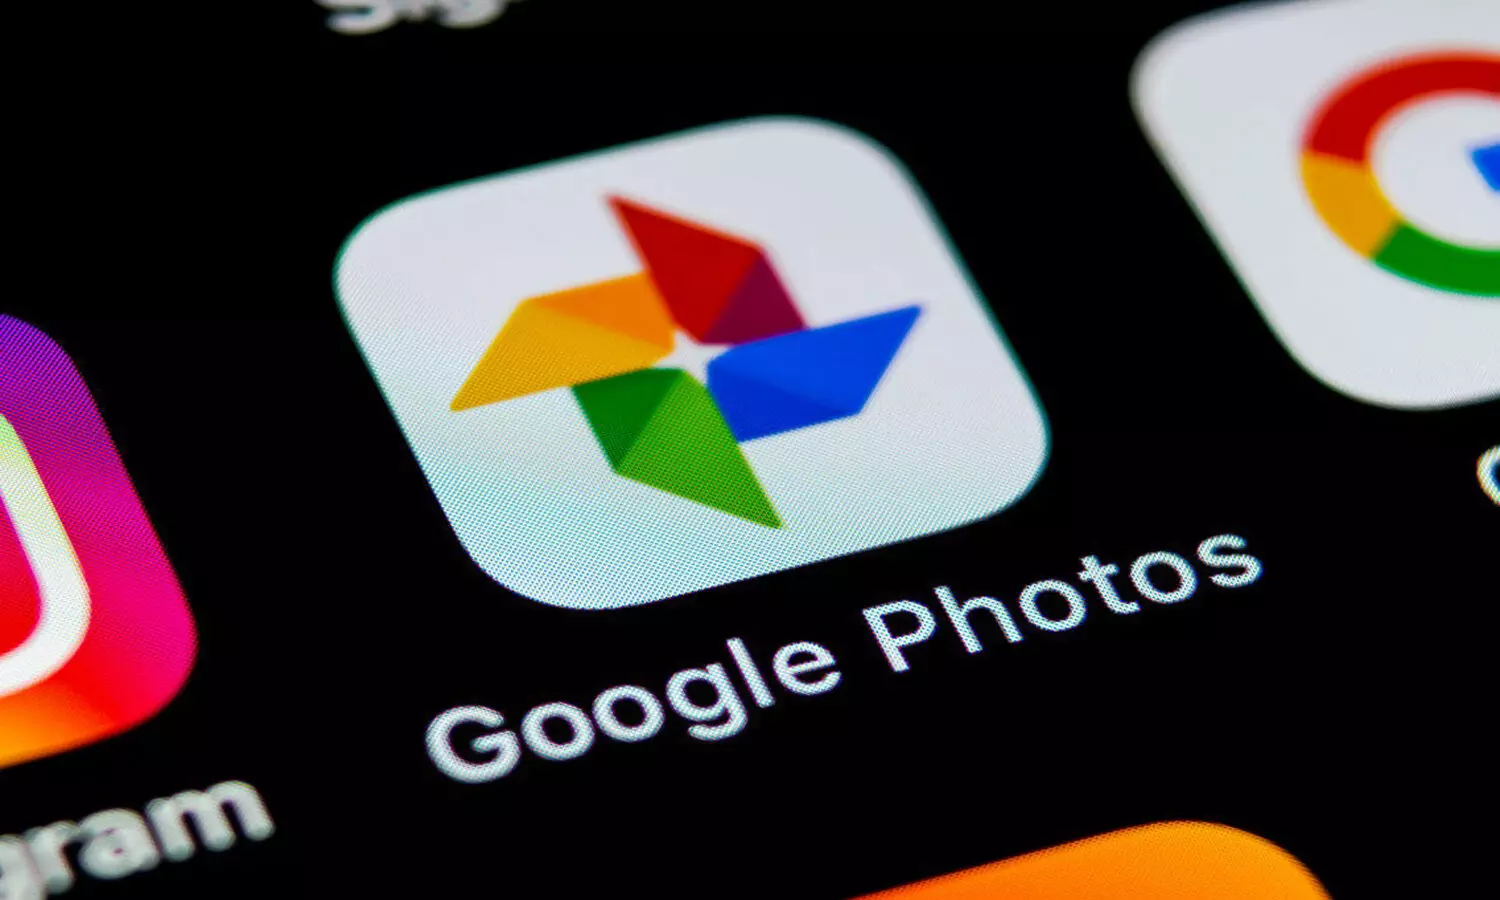 Check Out the New Locked Folder Feature in Google Photos